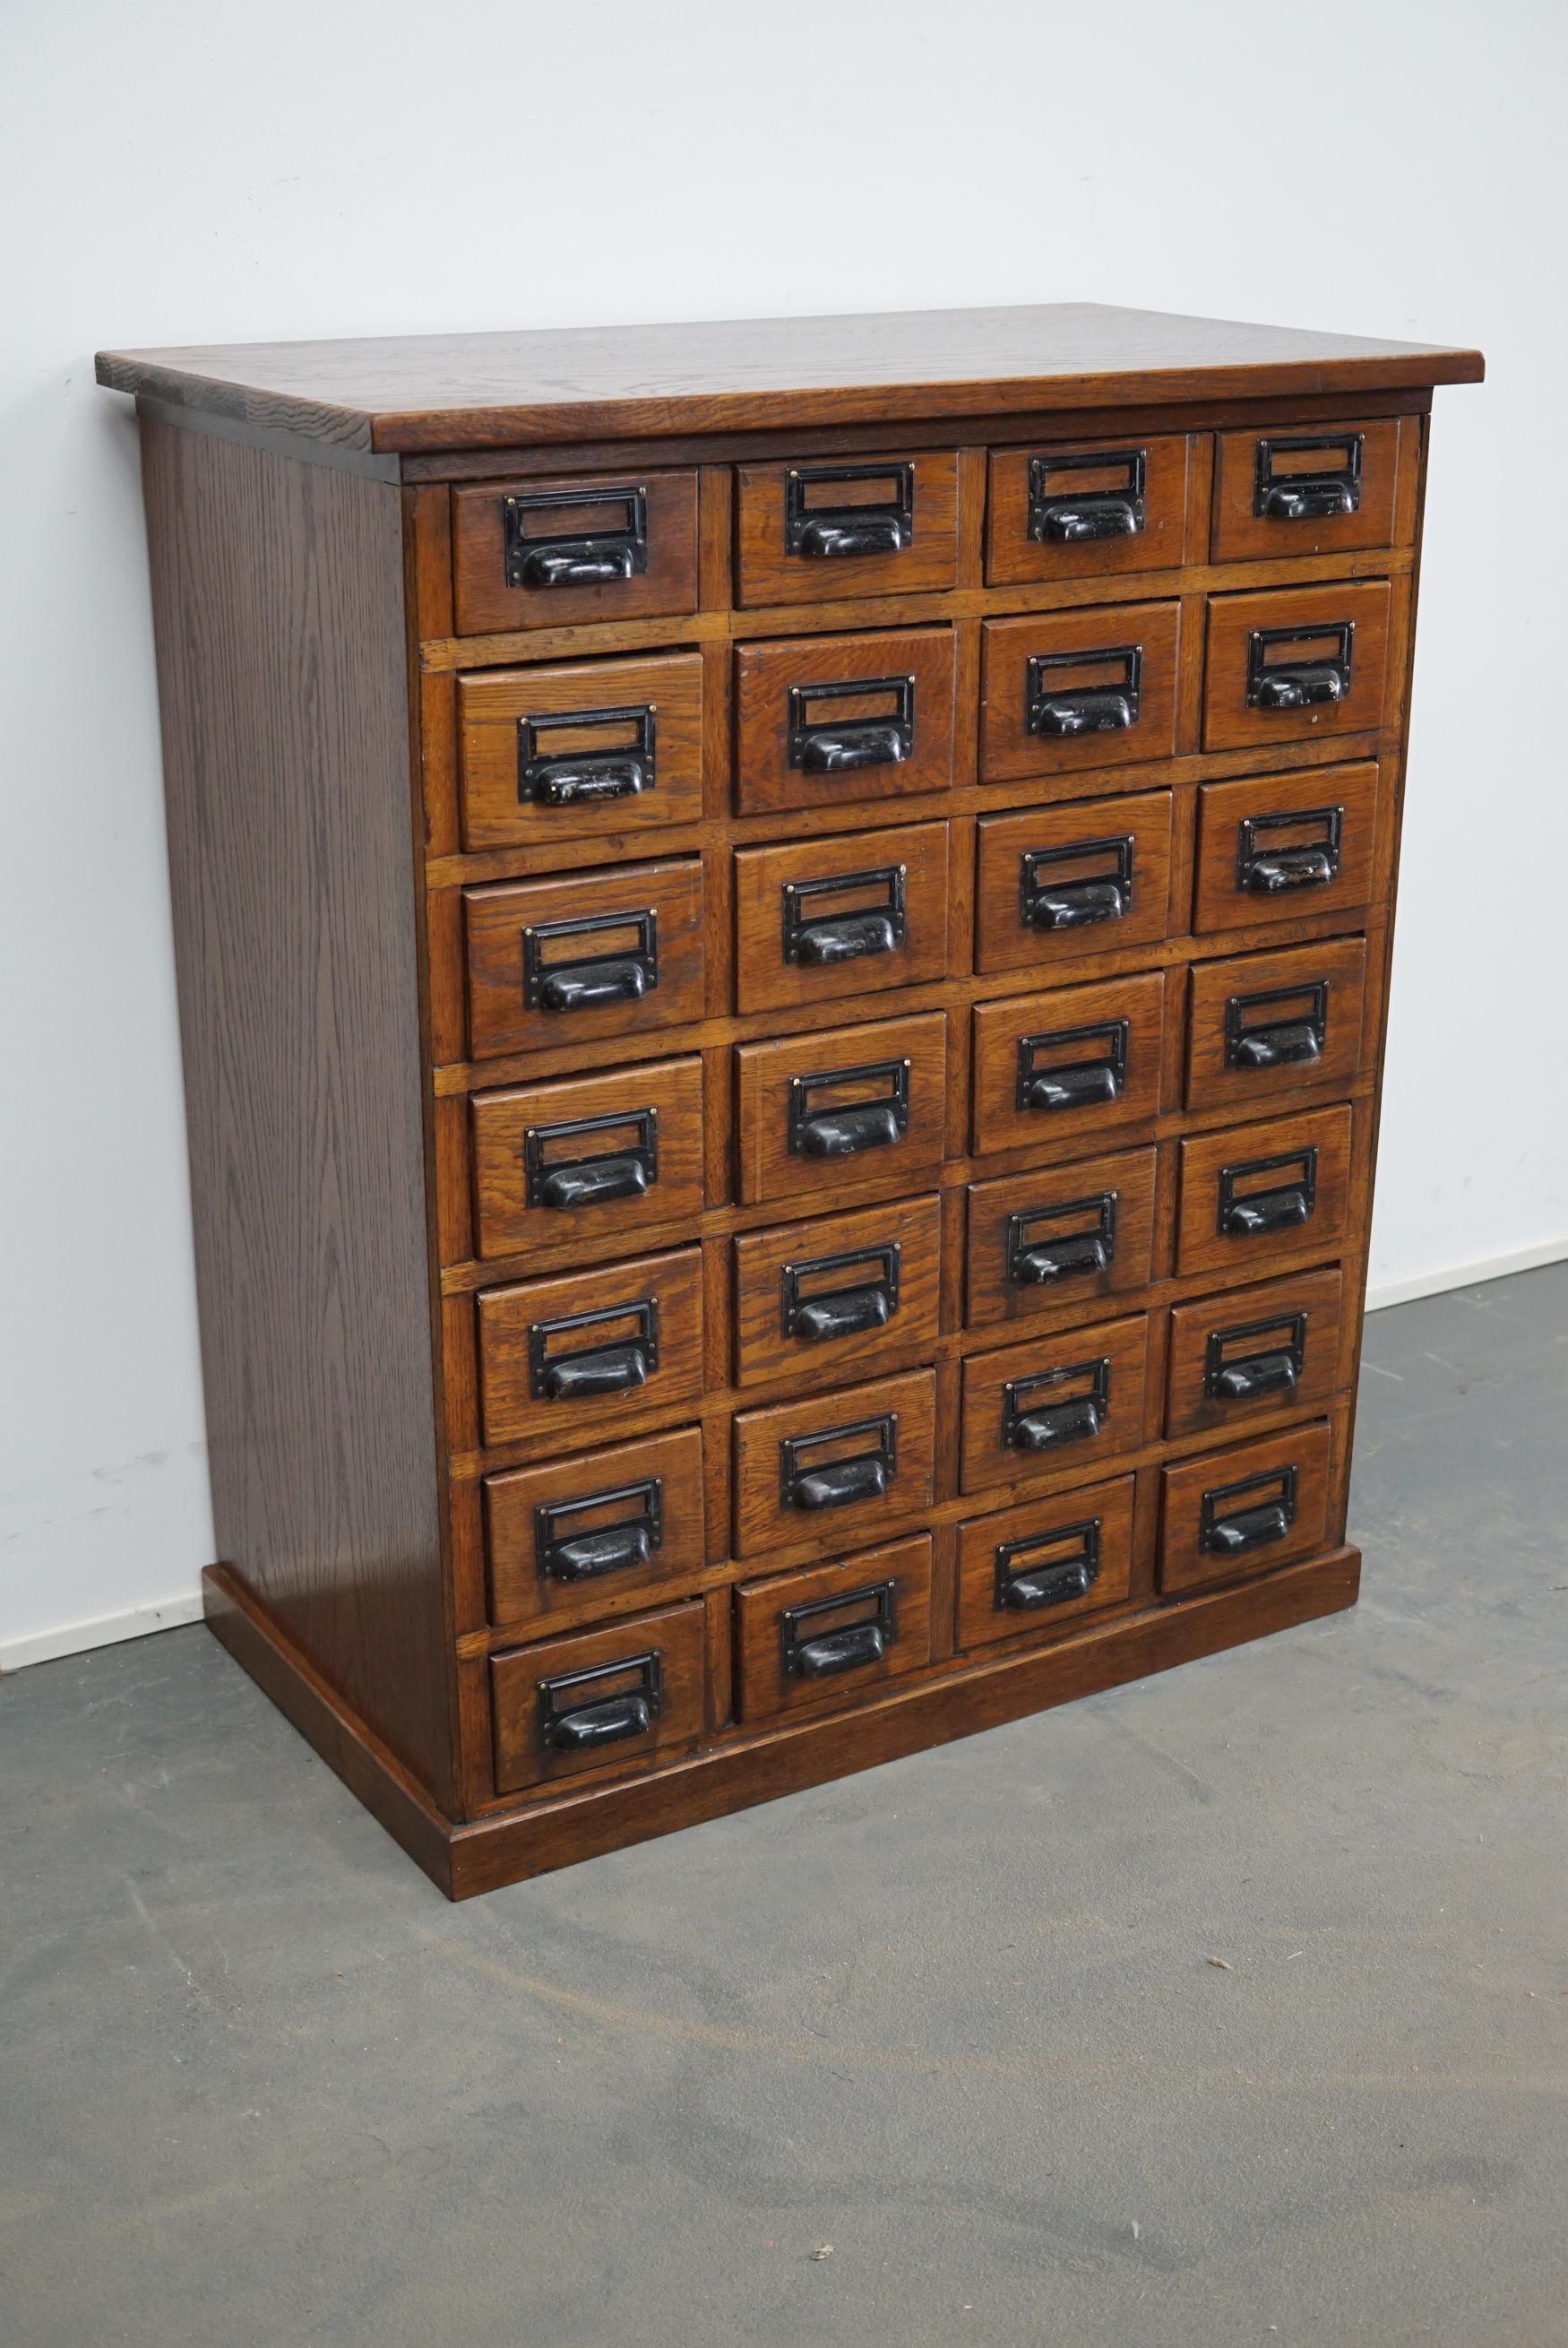 This apothecary cabinet was made circa 1930s in Germany. It features 28 drawers with nice black metal handles. It is made oak and it remains in a very good condition.